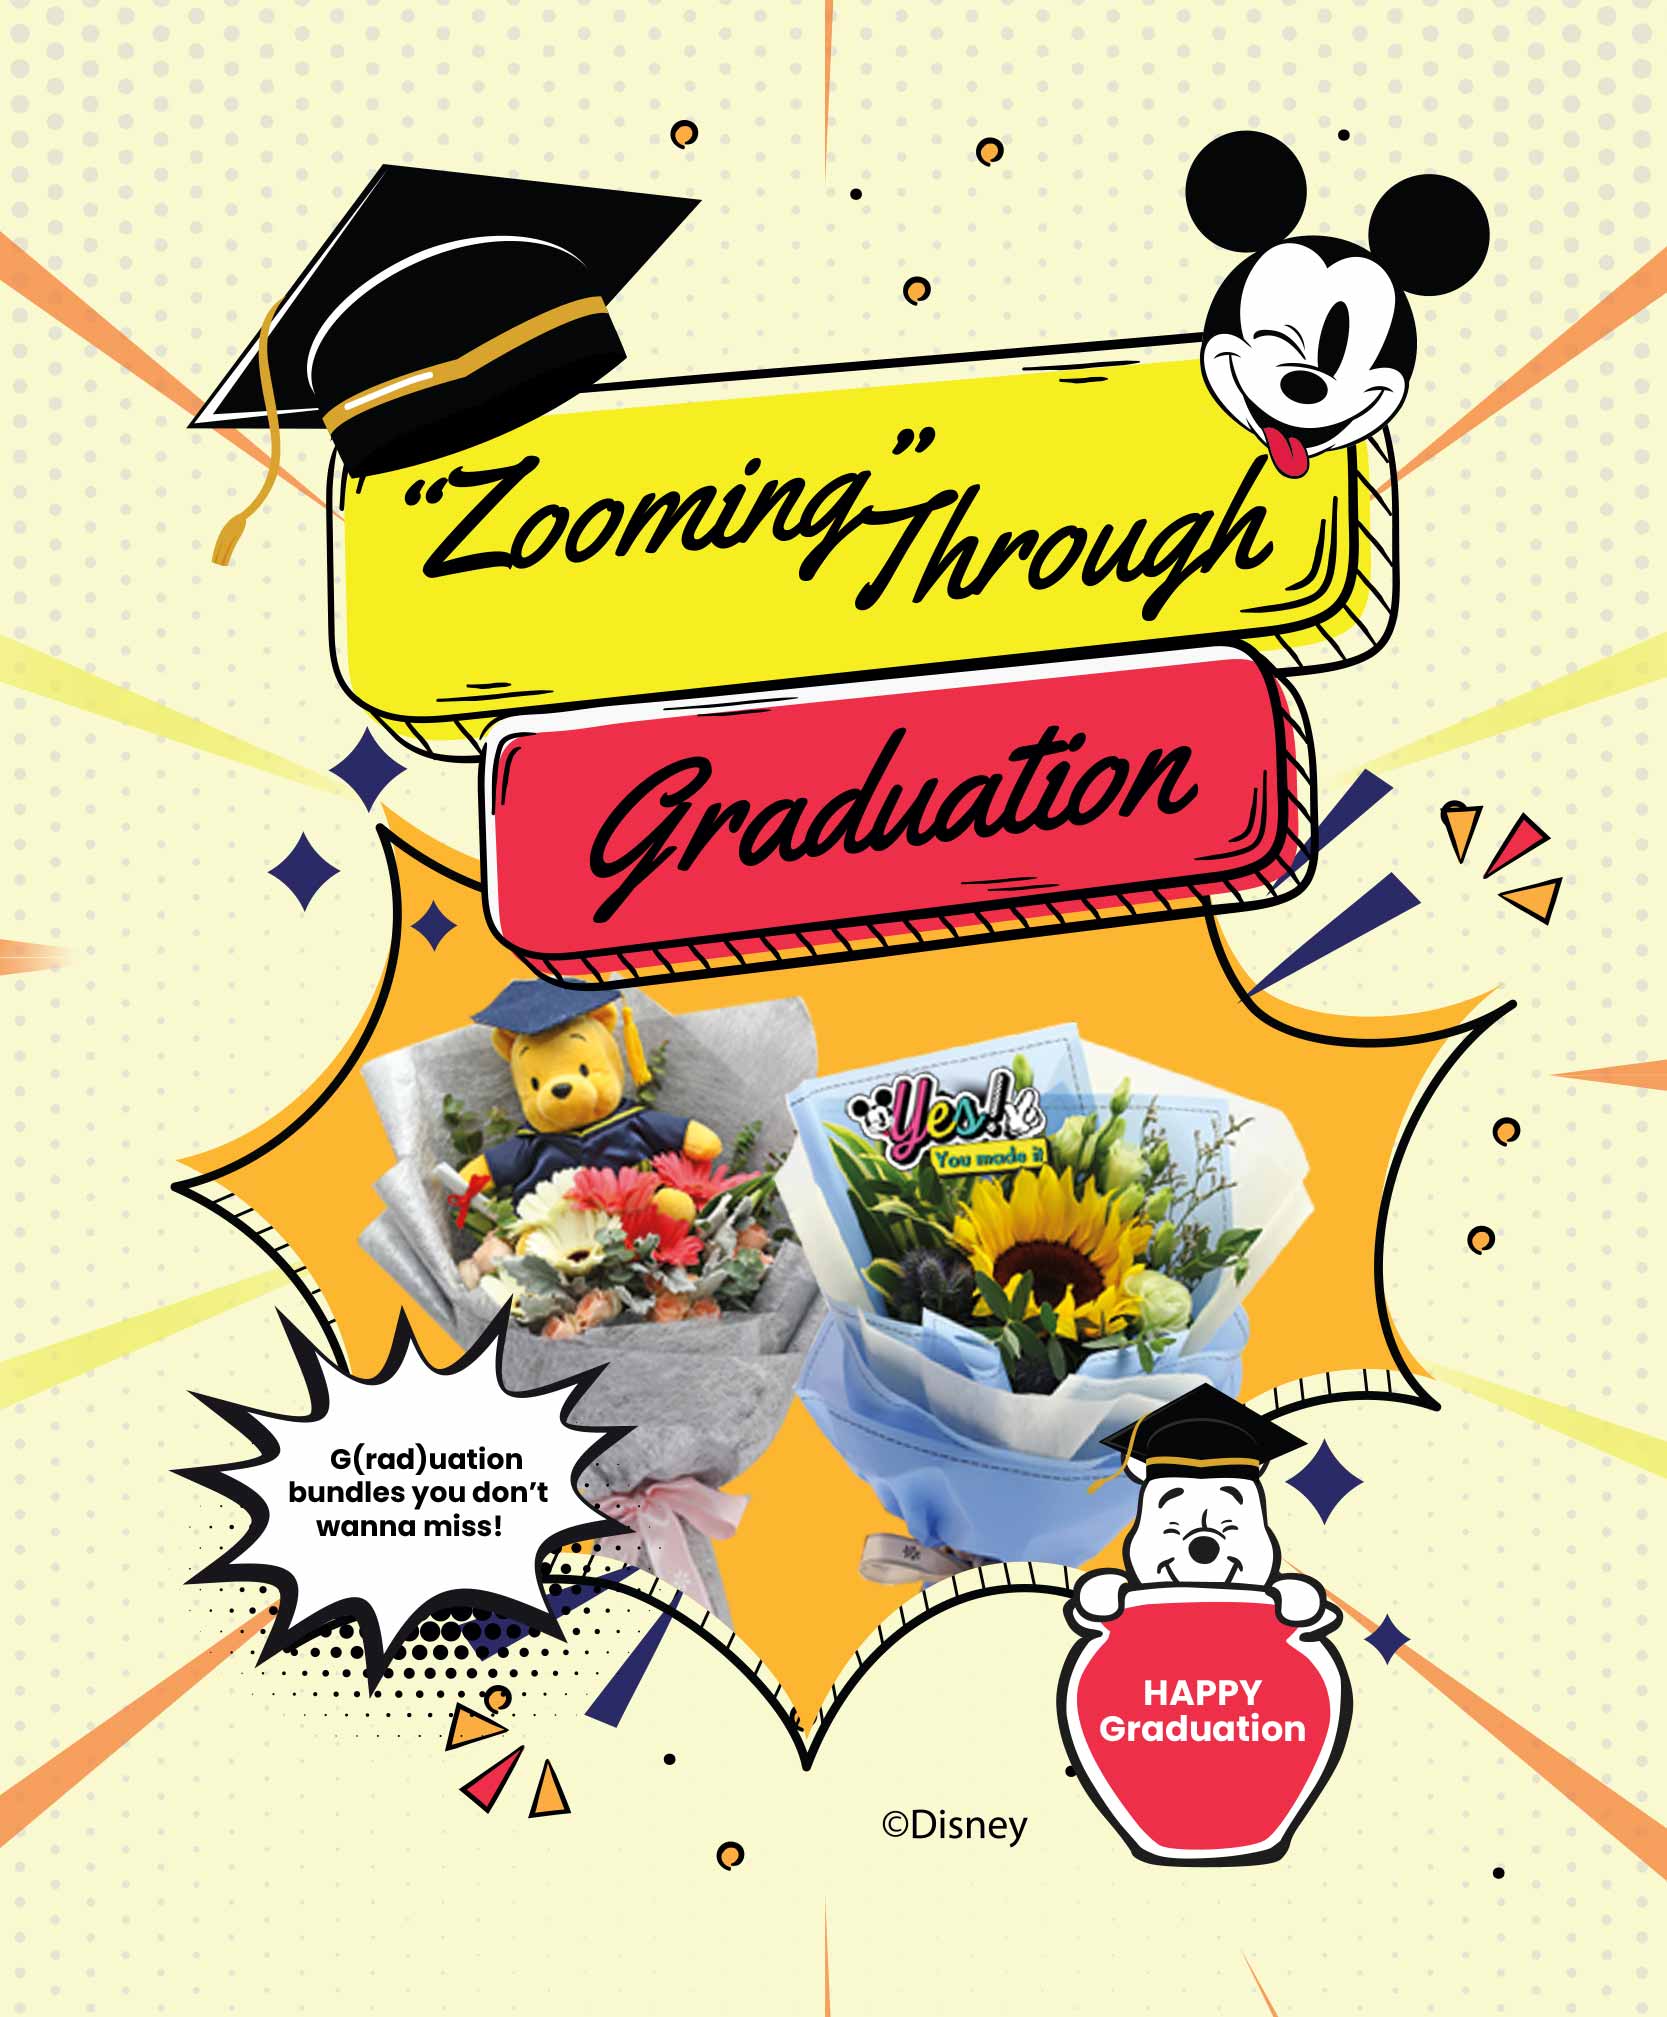 Celebrate with these special Graduation flowers & gifts!